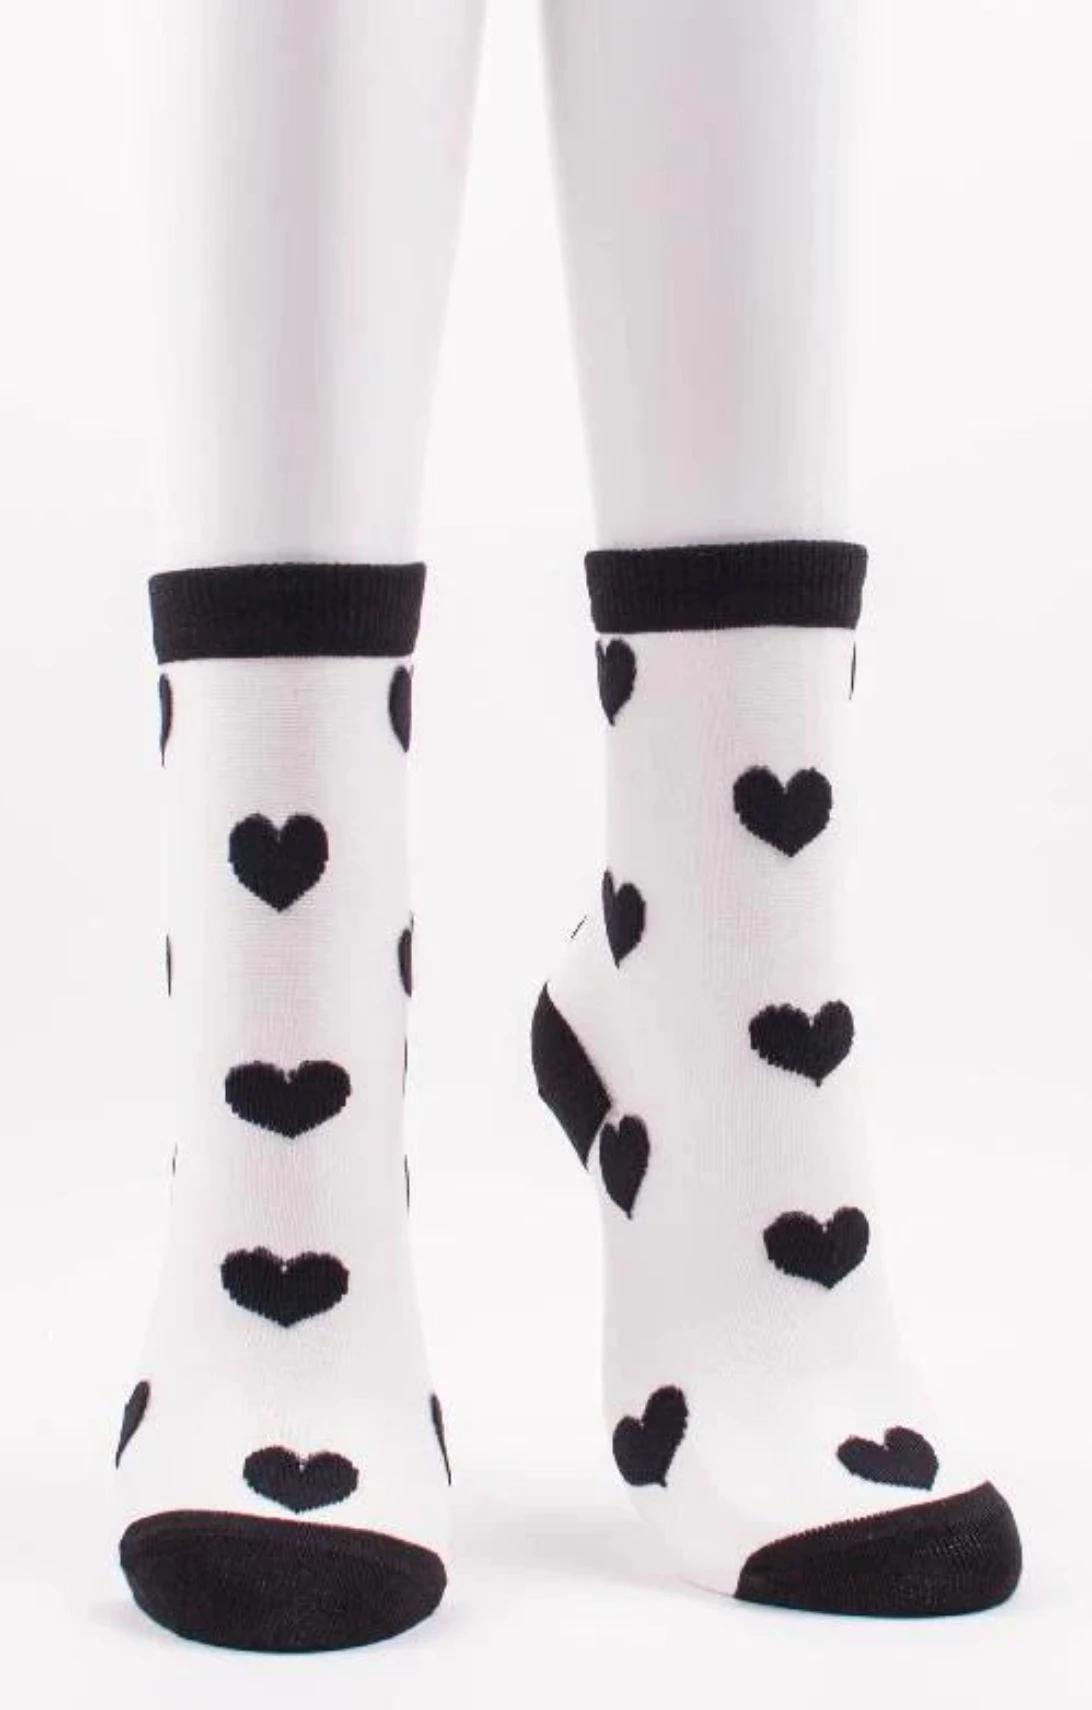 TABBISOCKS brand Black Heart Sheer Socks in BLACK color with black heart pattern all over the transparent transparent fabric